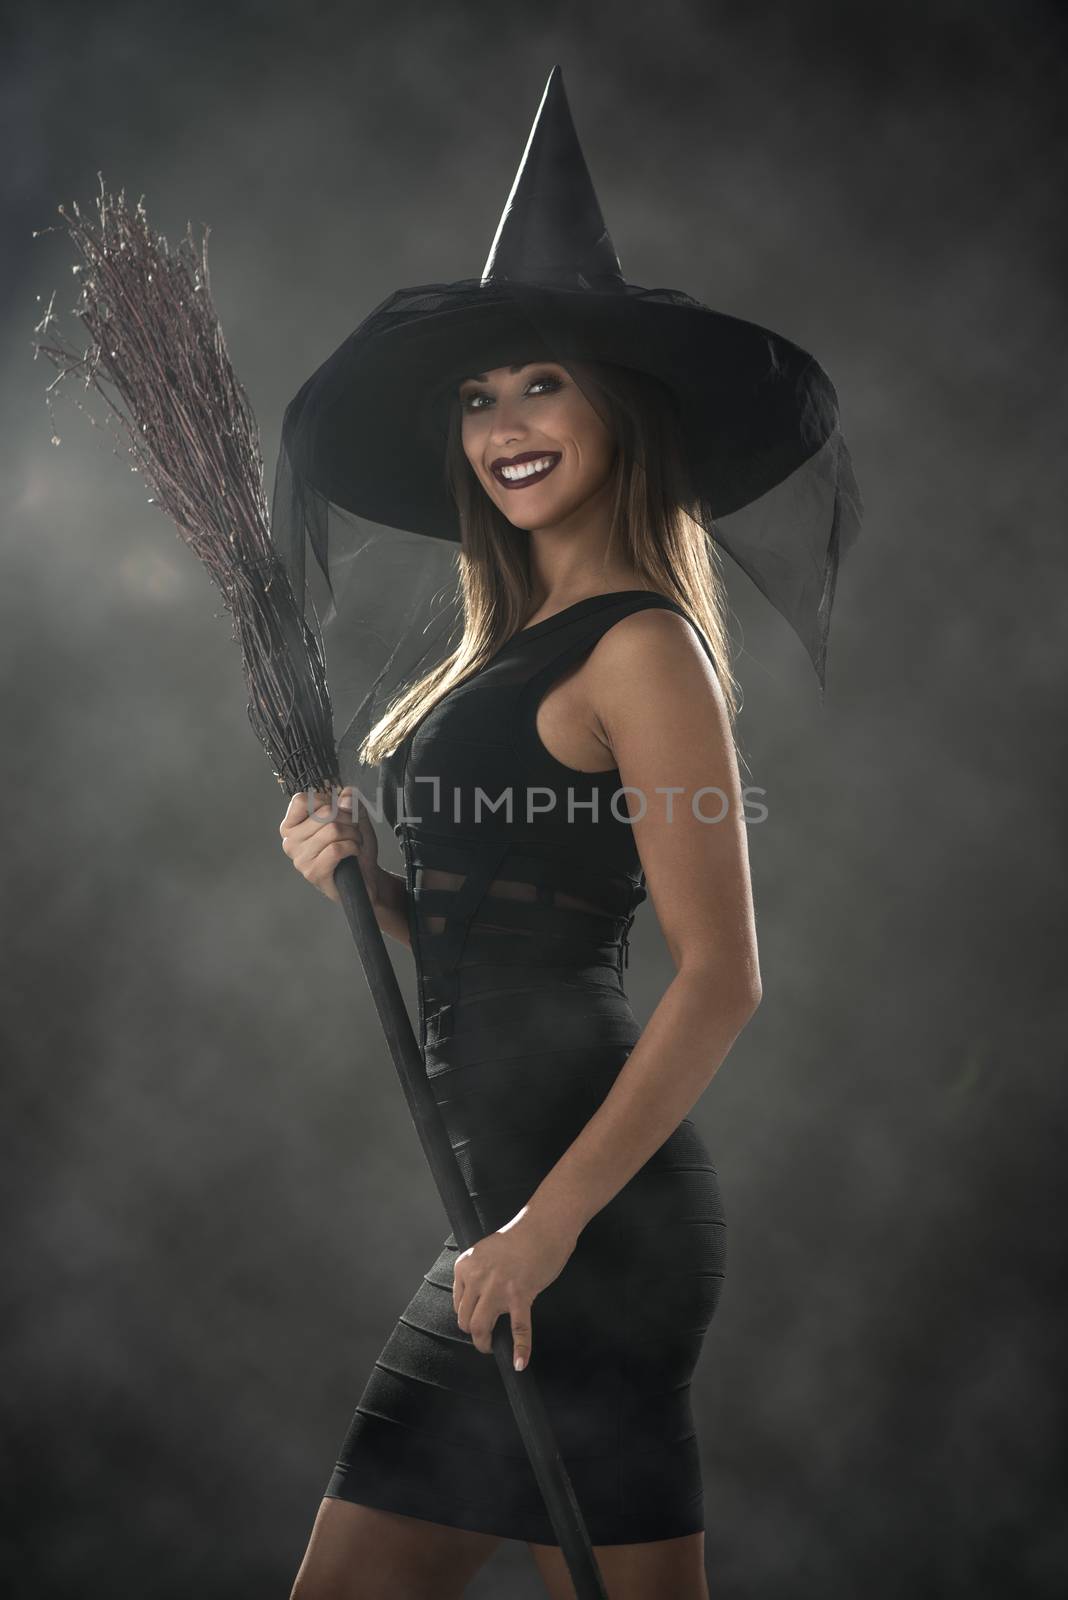 Young woman dressed like a witch. She is in dark clothing and holding a broom.